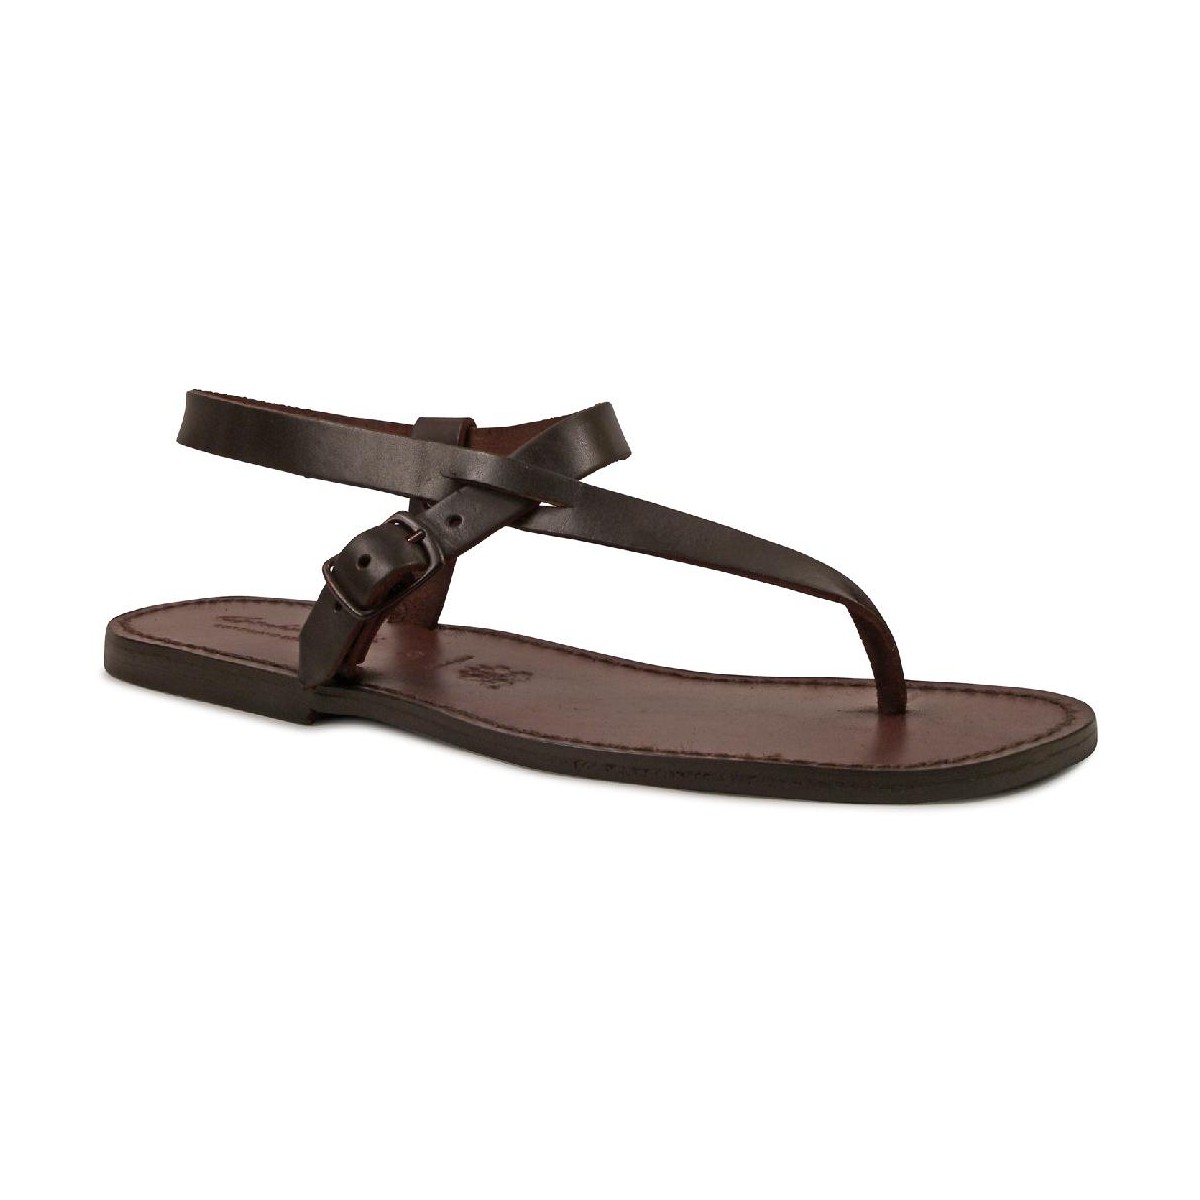 Leather thong sandals - Woman